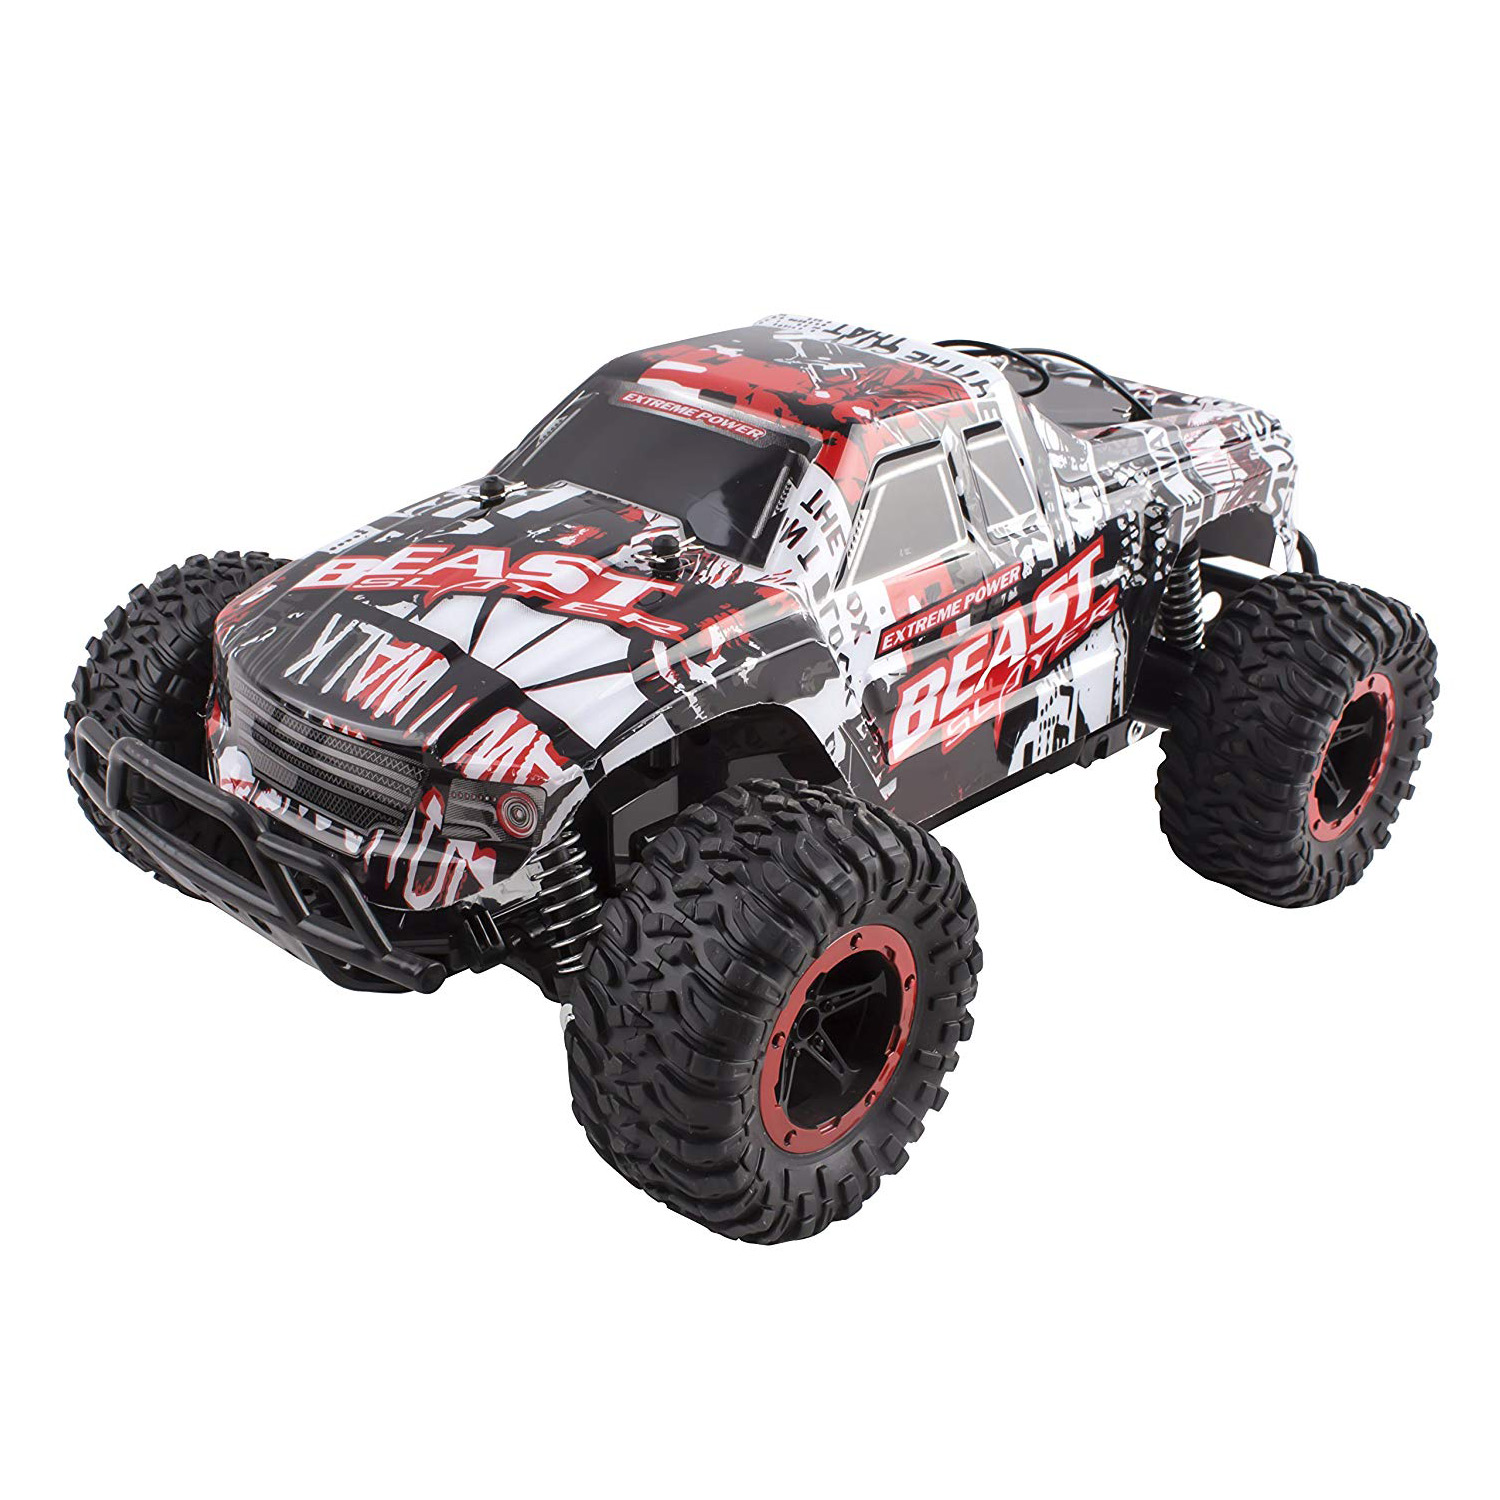 RC Truck Beast Slayer Removable Body Remote Control Turbo RC Buggy Car Large 1:16 Scale Size RTR With Working Suspension, High Speed, Radio Control Off-Road Hobby Truggy Rechargeable (Red)